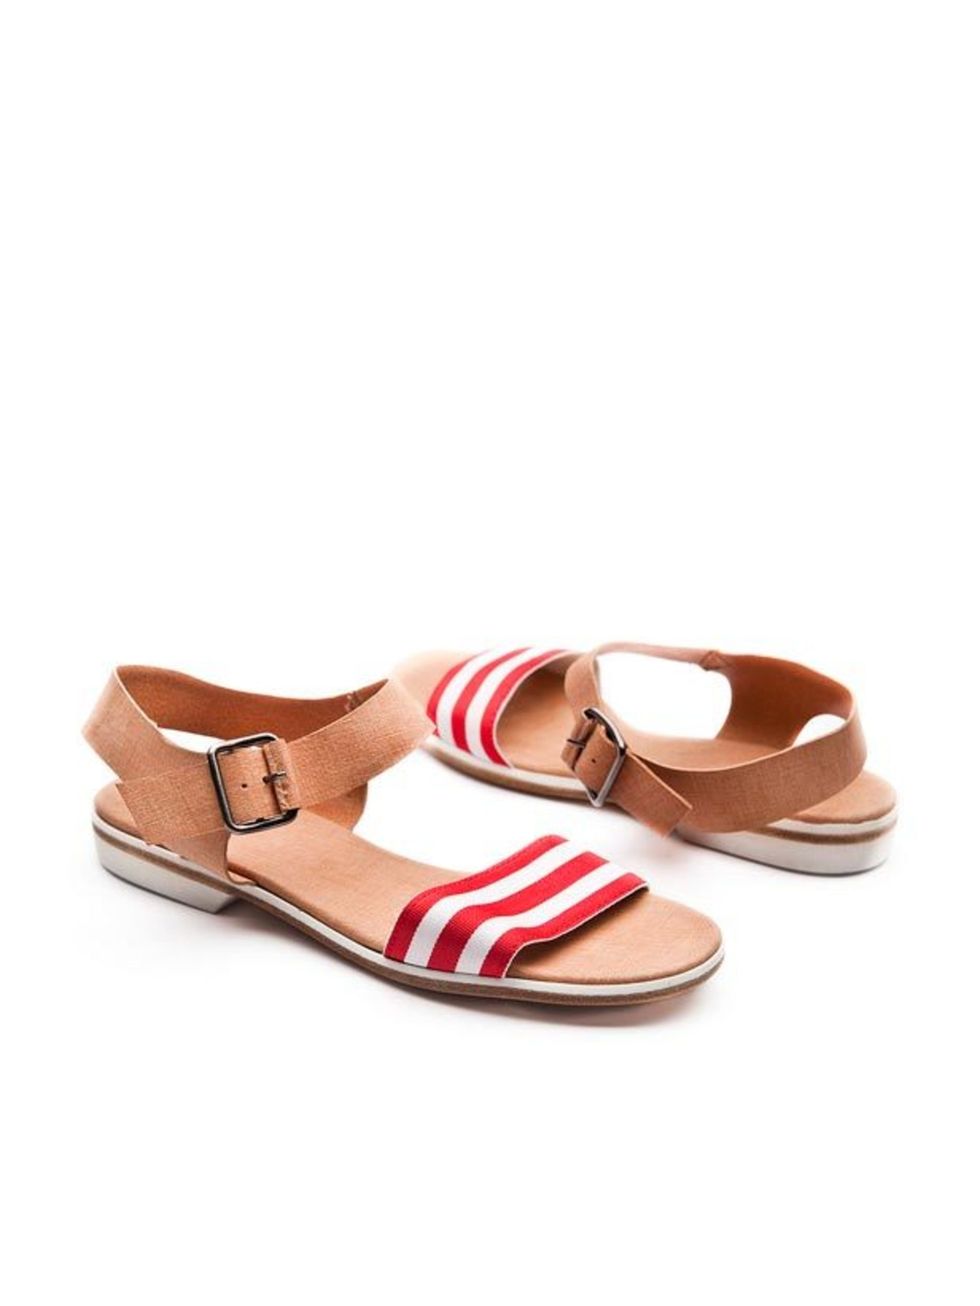 <p> </p><p> </p><p>Exposing your pedicured toes is the first step in spring dressing so make these understated, preppy sandals your pair of choice... <a href="http://www.tn29.com/collection_tn29.php">Tracey Neuls</a> sandals, £195</p>